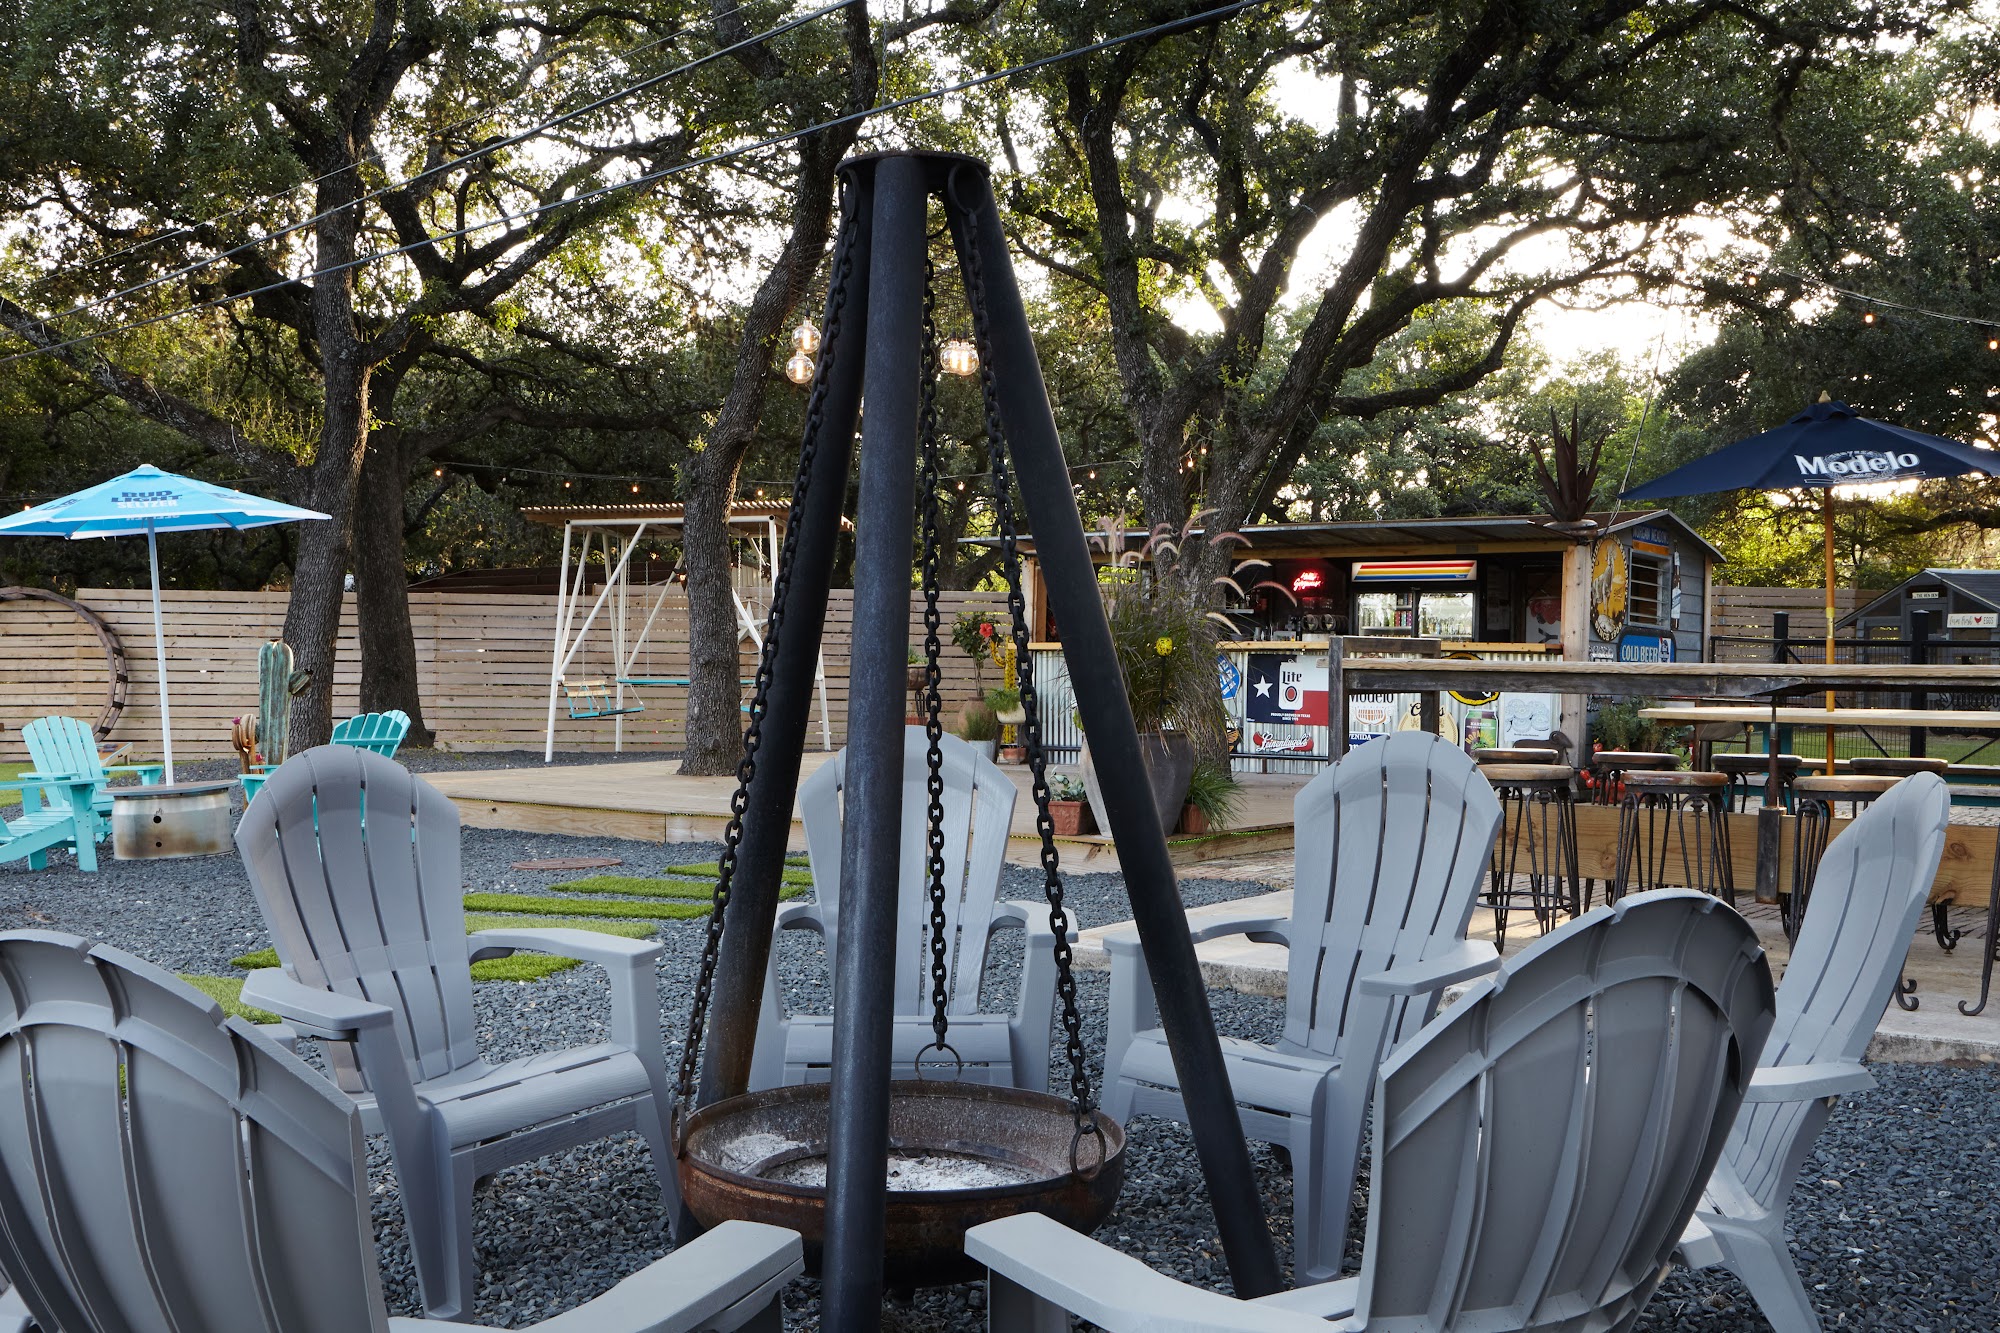 Helotes Country Club & Helotes Beer Garden